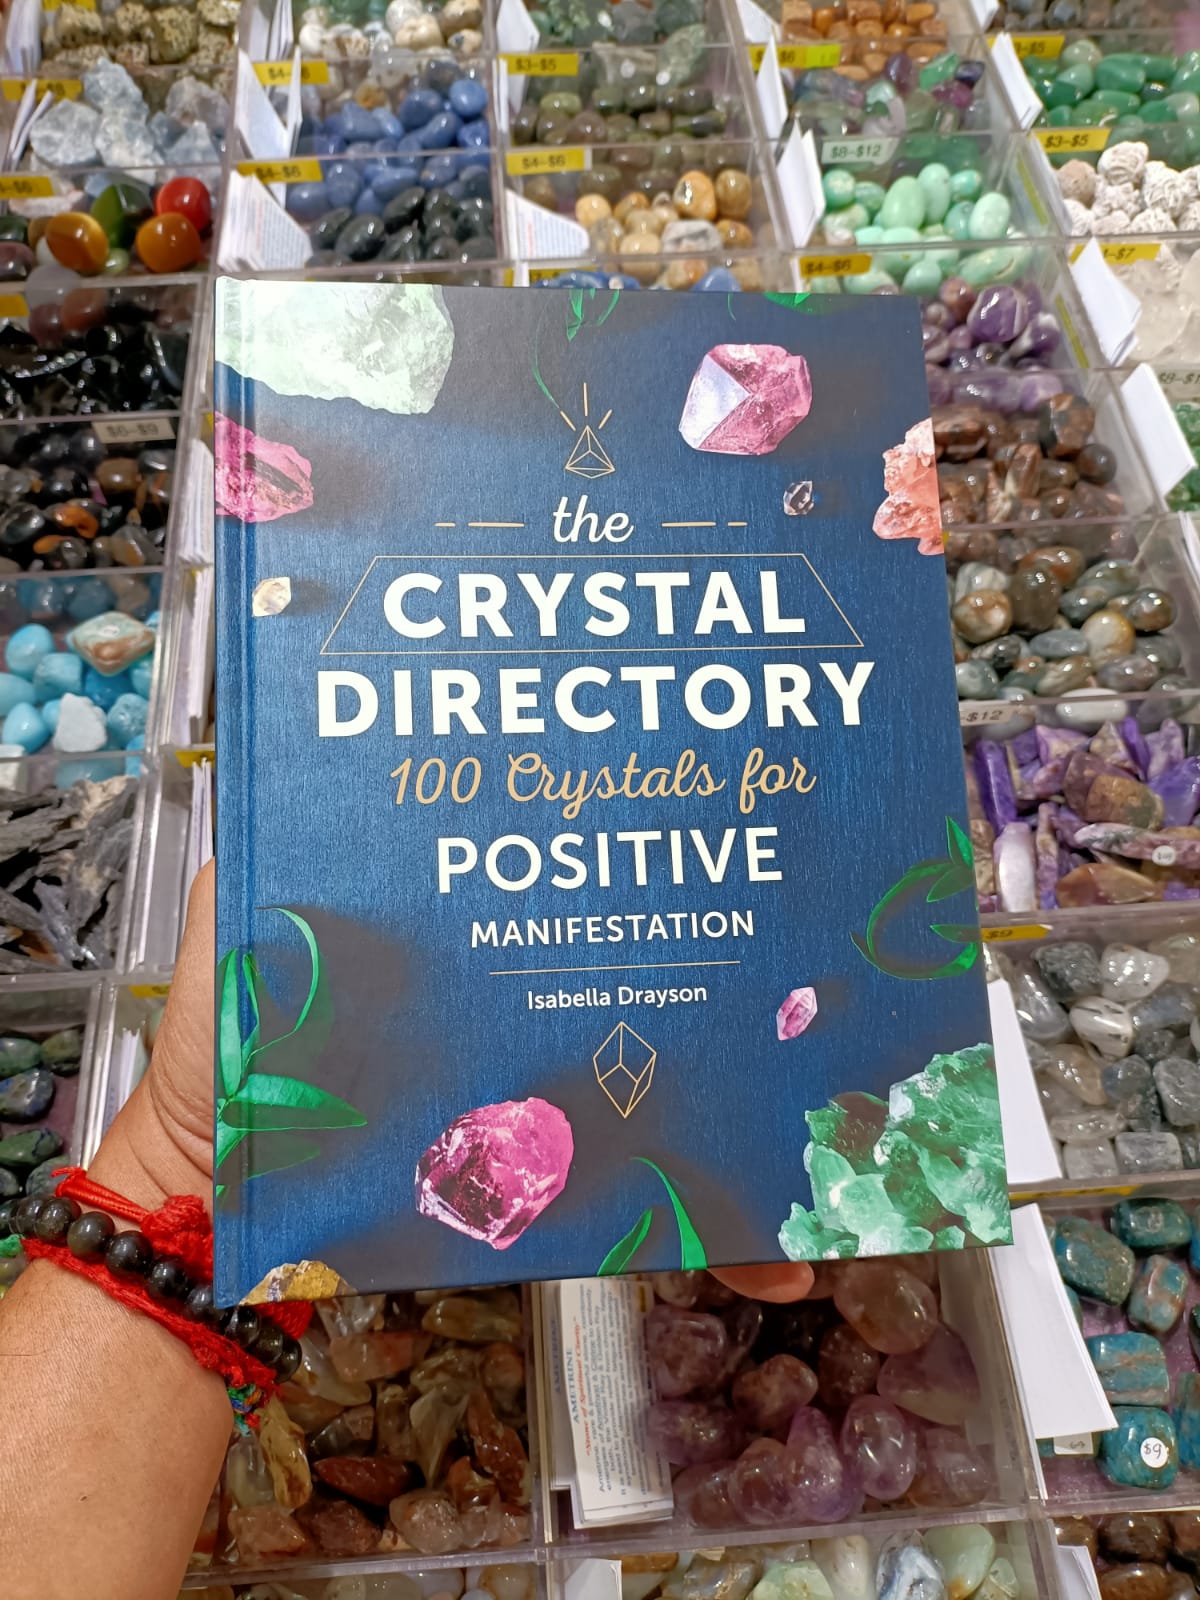 The Crystal Directory, 100 Crystals for Positive Manifestation

